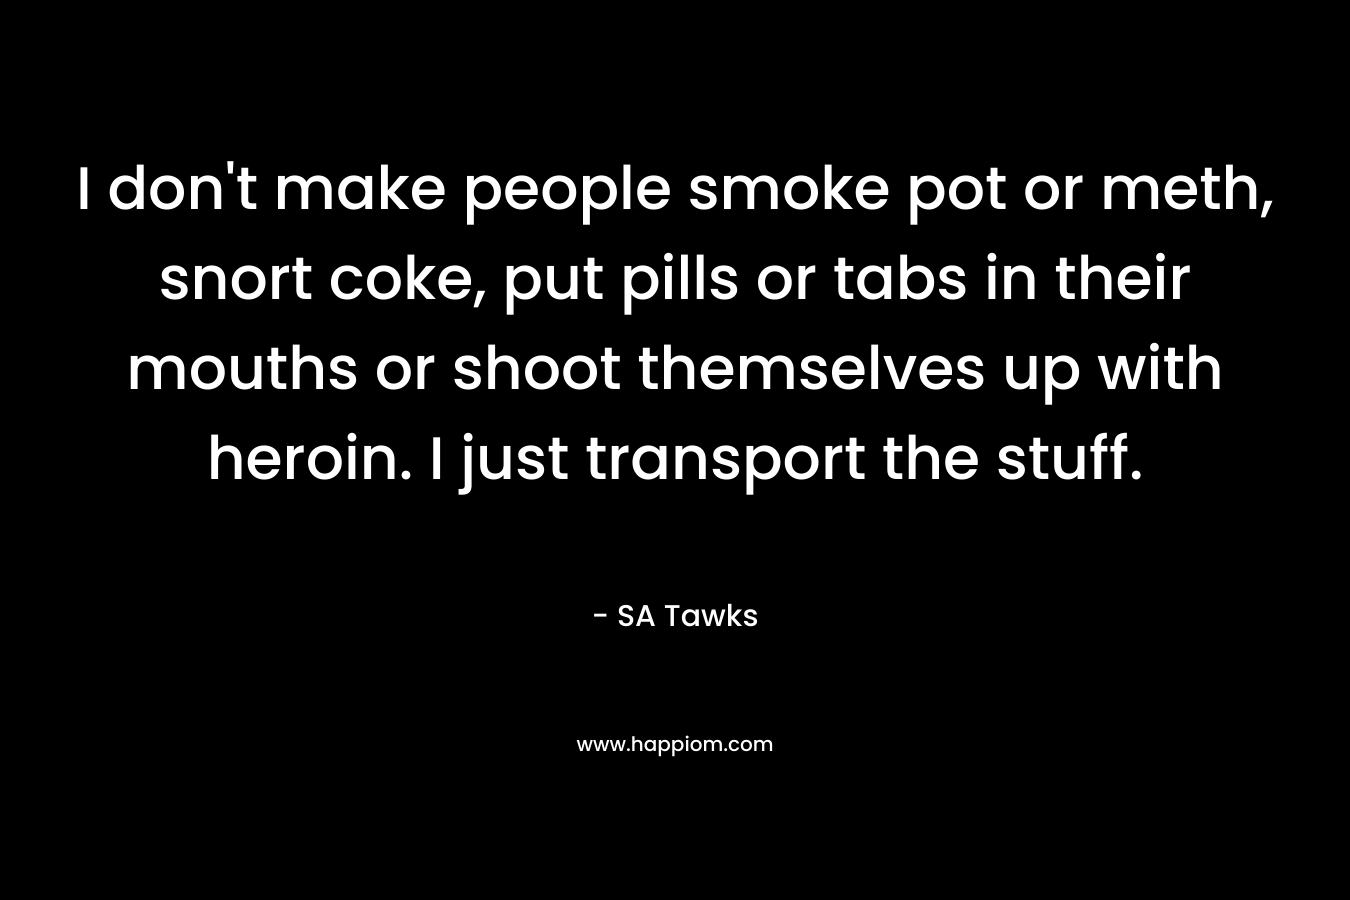 I don’t make people smoke pot or meth, snort coke, put pills or tabs in their mouths or shoot themselves up with heroin. I just transport the stuff. – SA Tawks